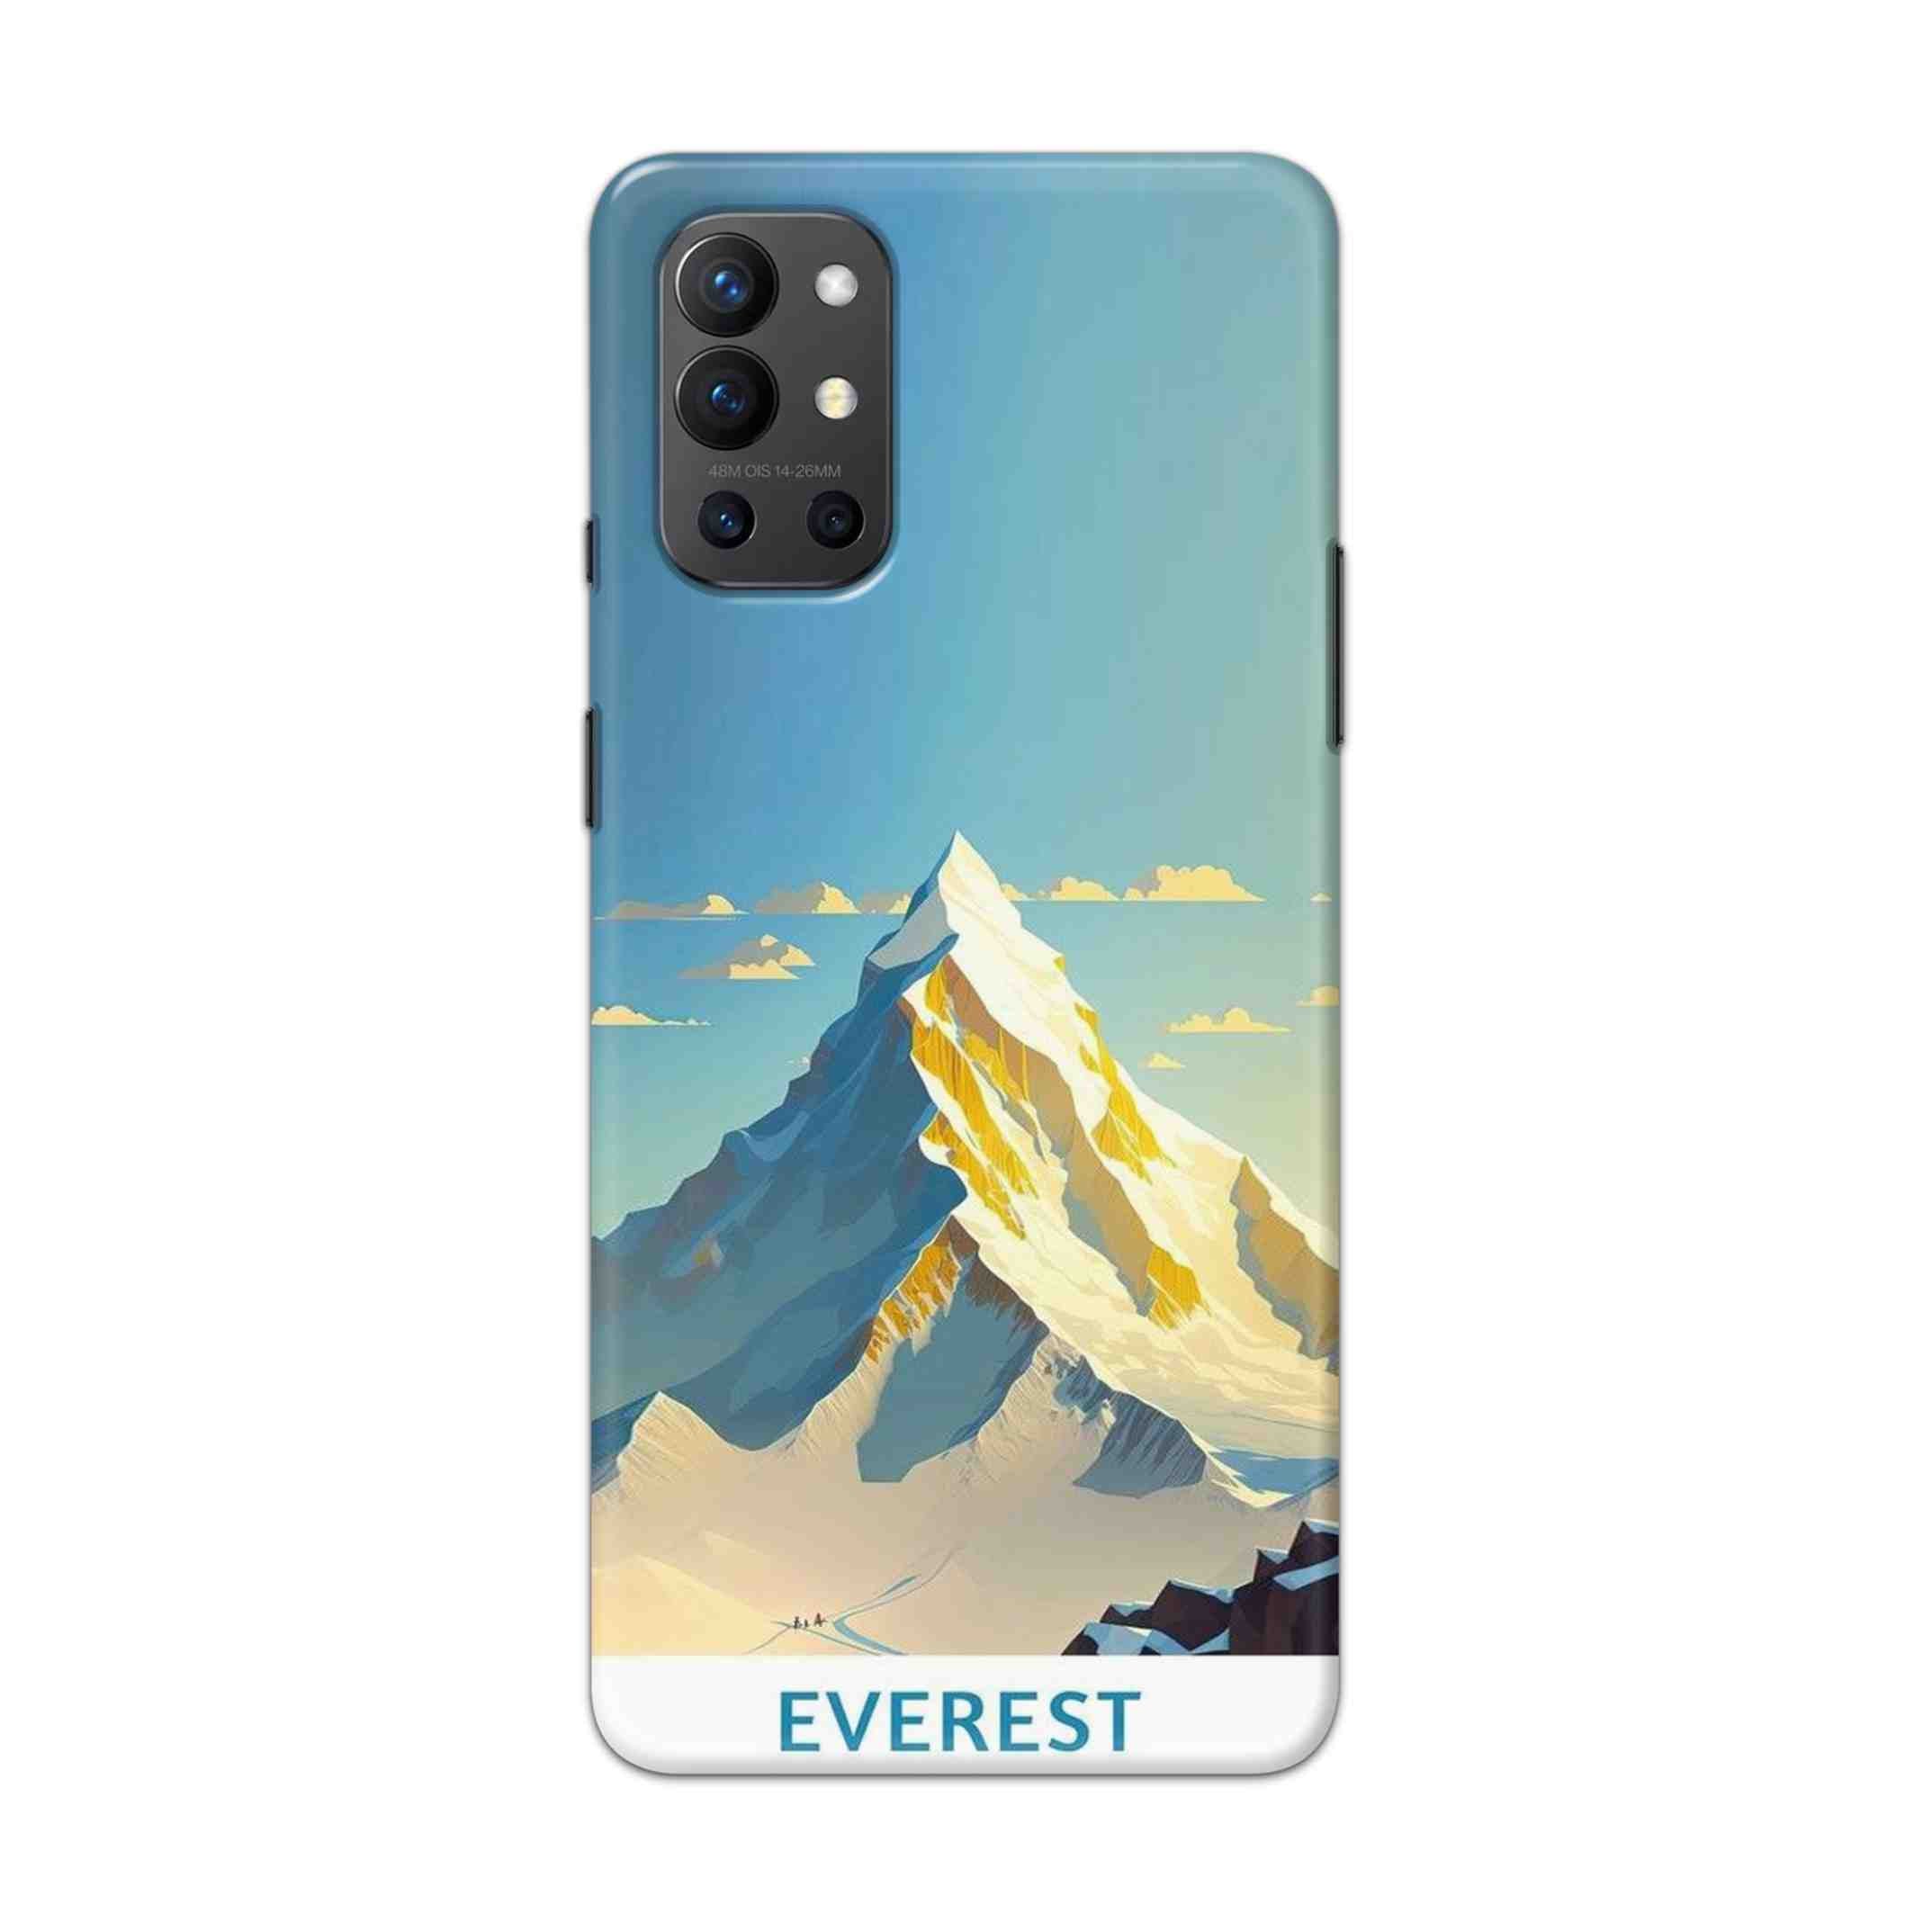 Buy Everest Hard Back Mobile Phone Case Cover For OnePlus 9R / 8T Online